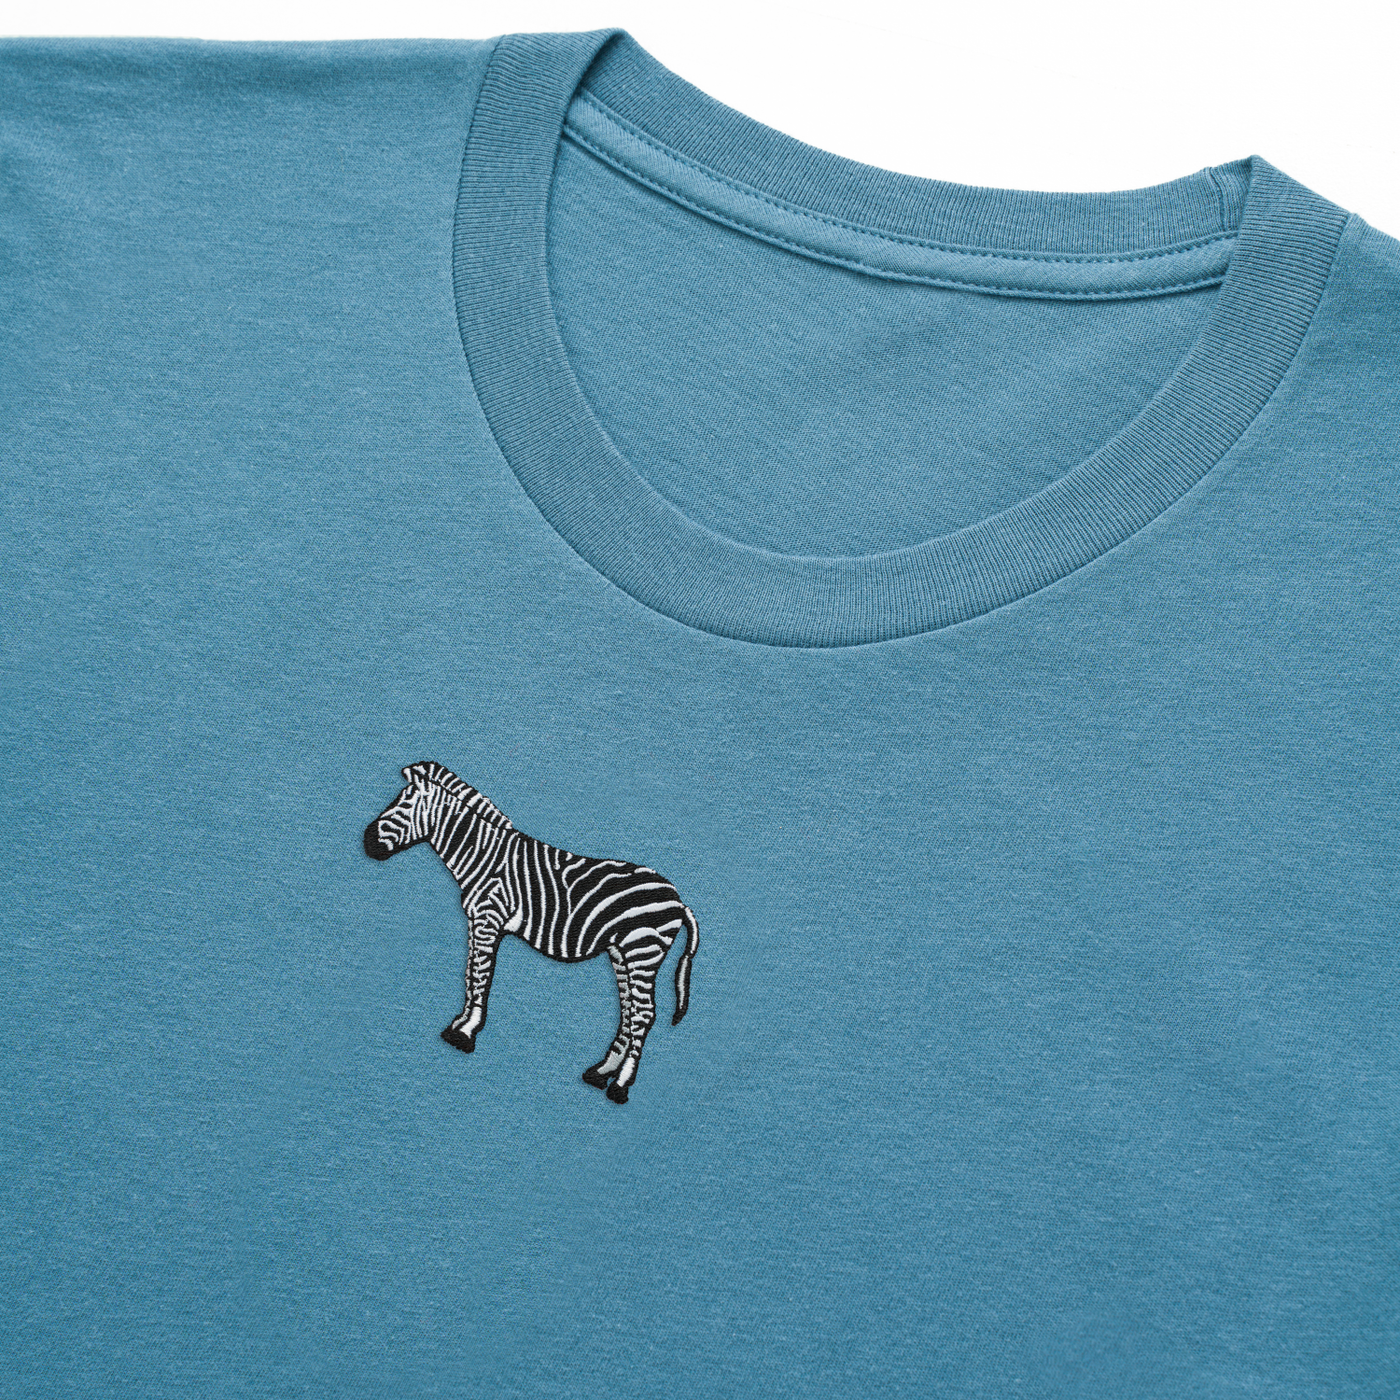 Bobby's Planet Men's Embroidered Zebra T-Shirt from African Animals Collection in Steel Blue Color#color_steel-blue